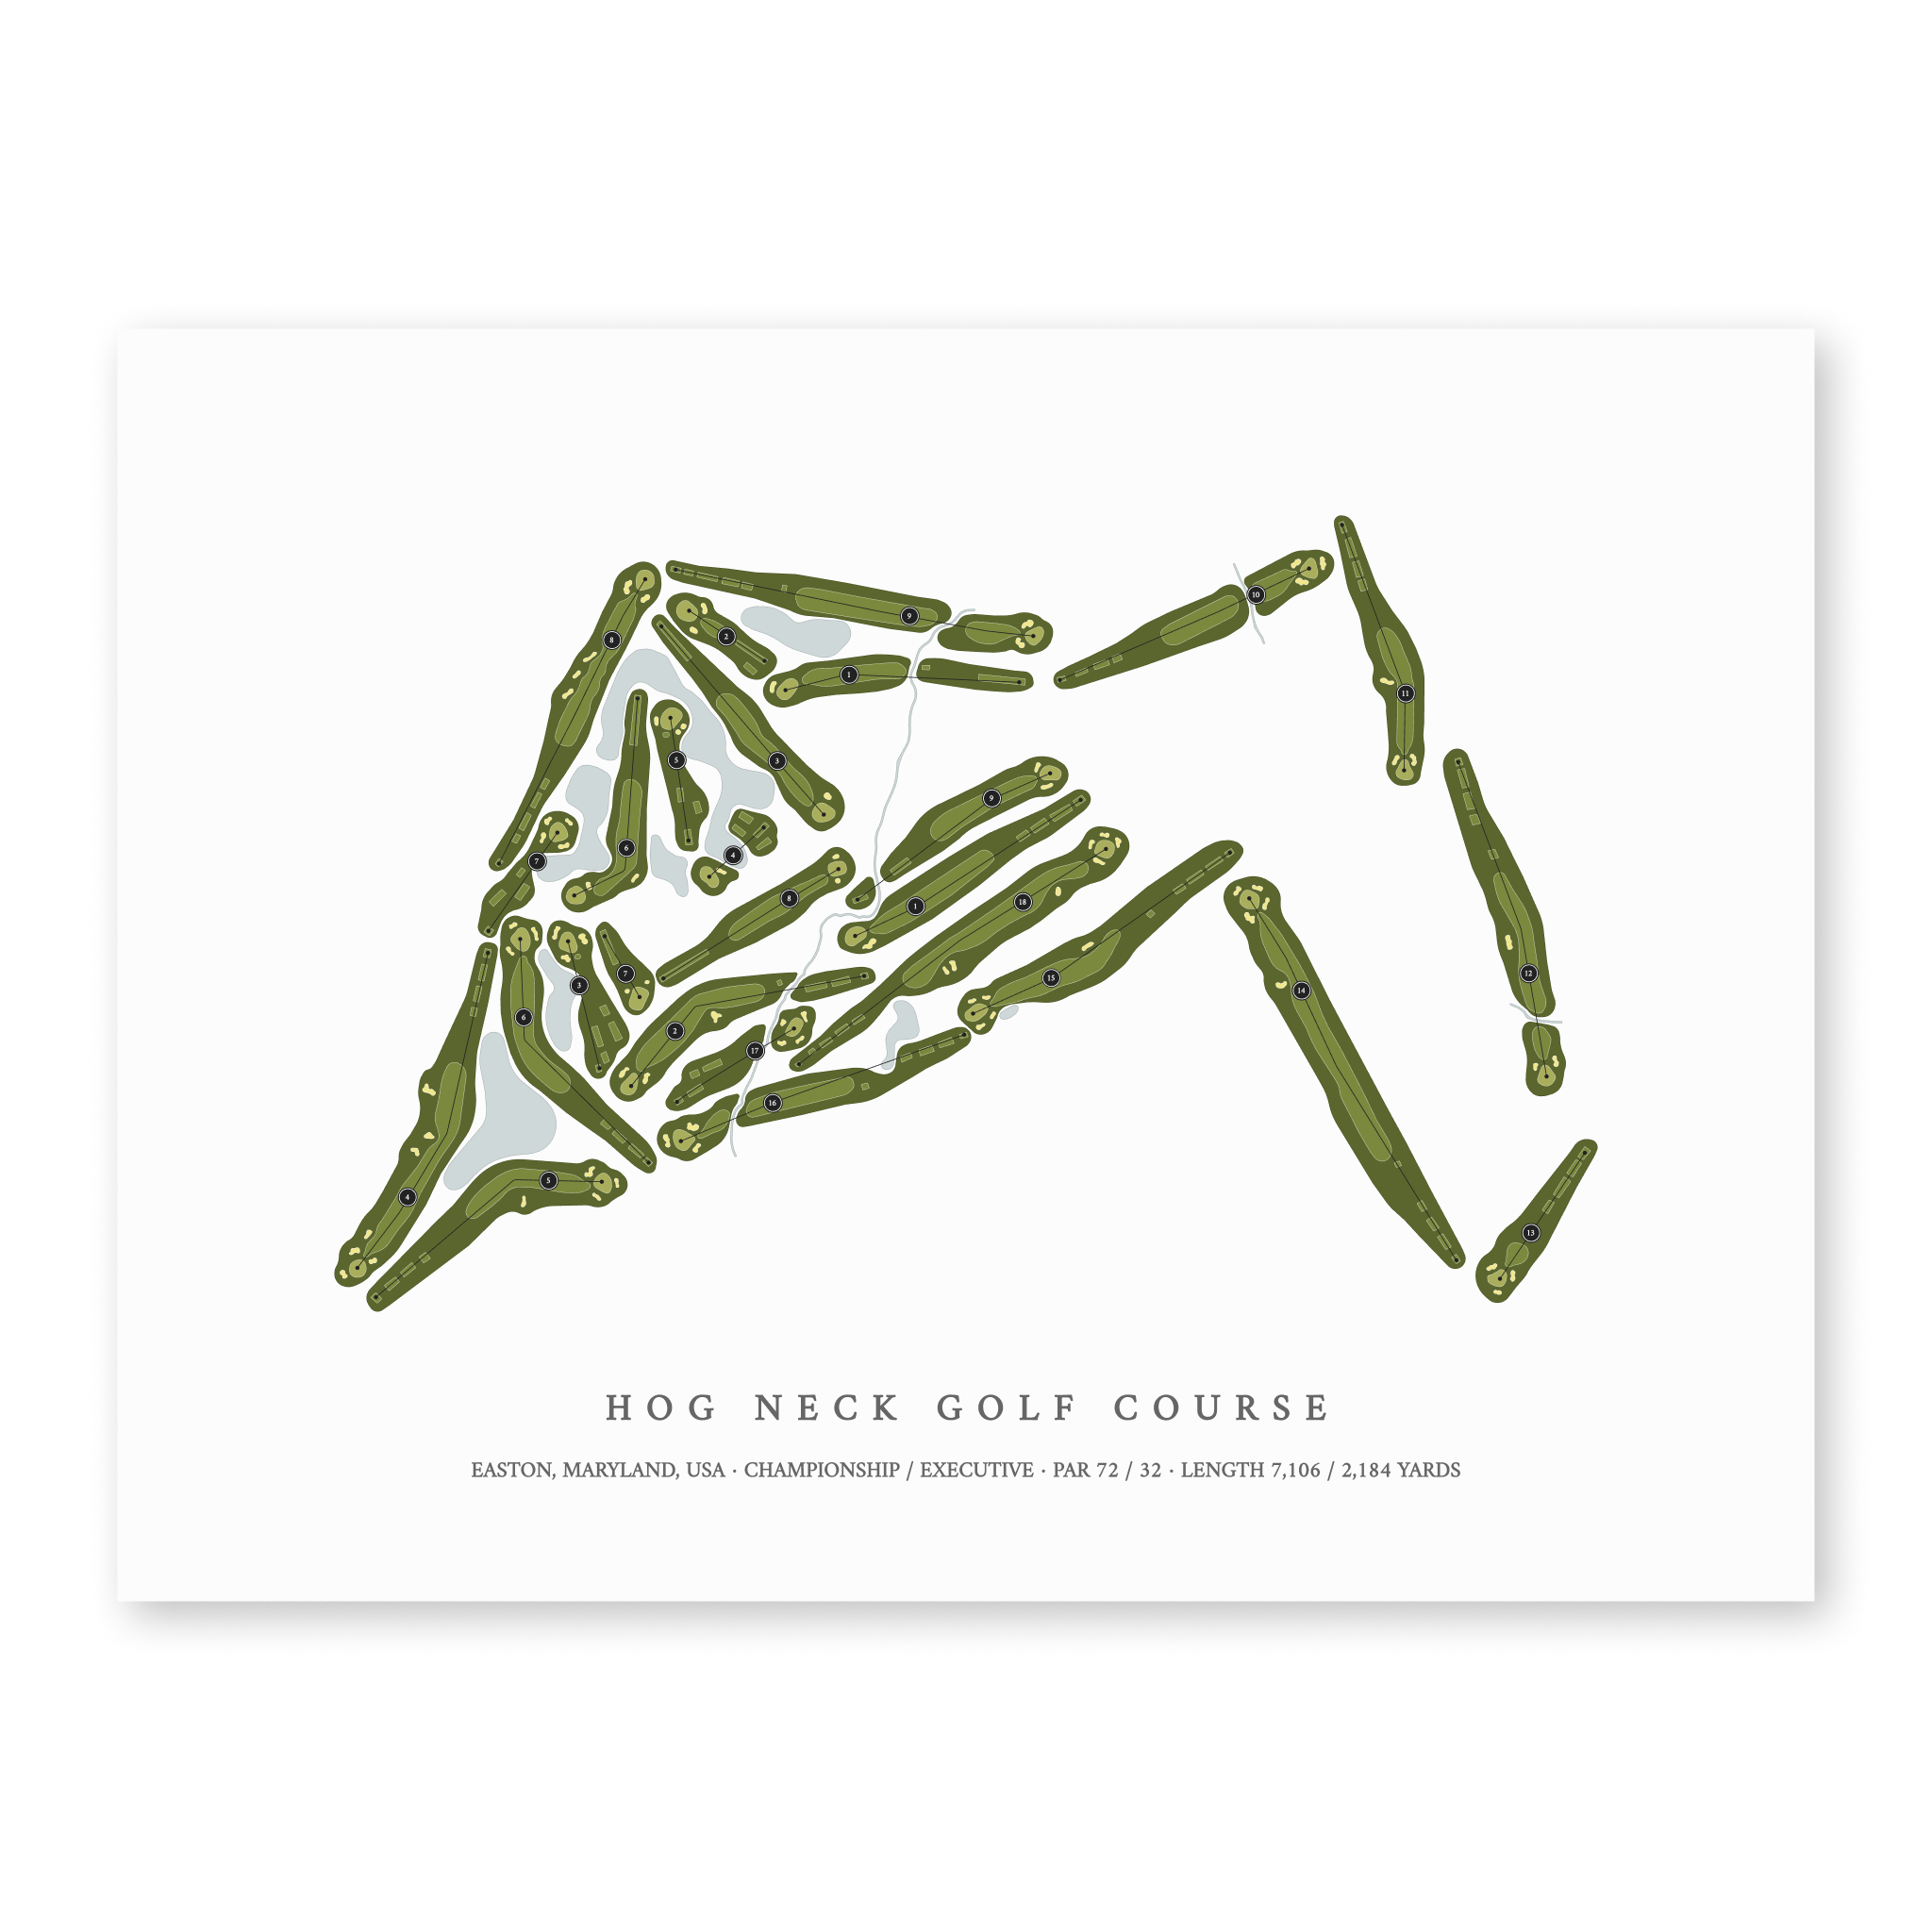 Hog Neck Golf Course | Golf Course Map | Unframed With Hole Numbers #hole numbers_yes